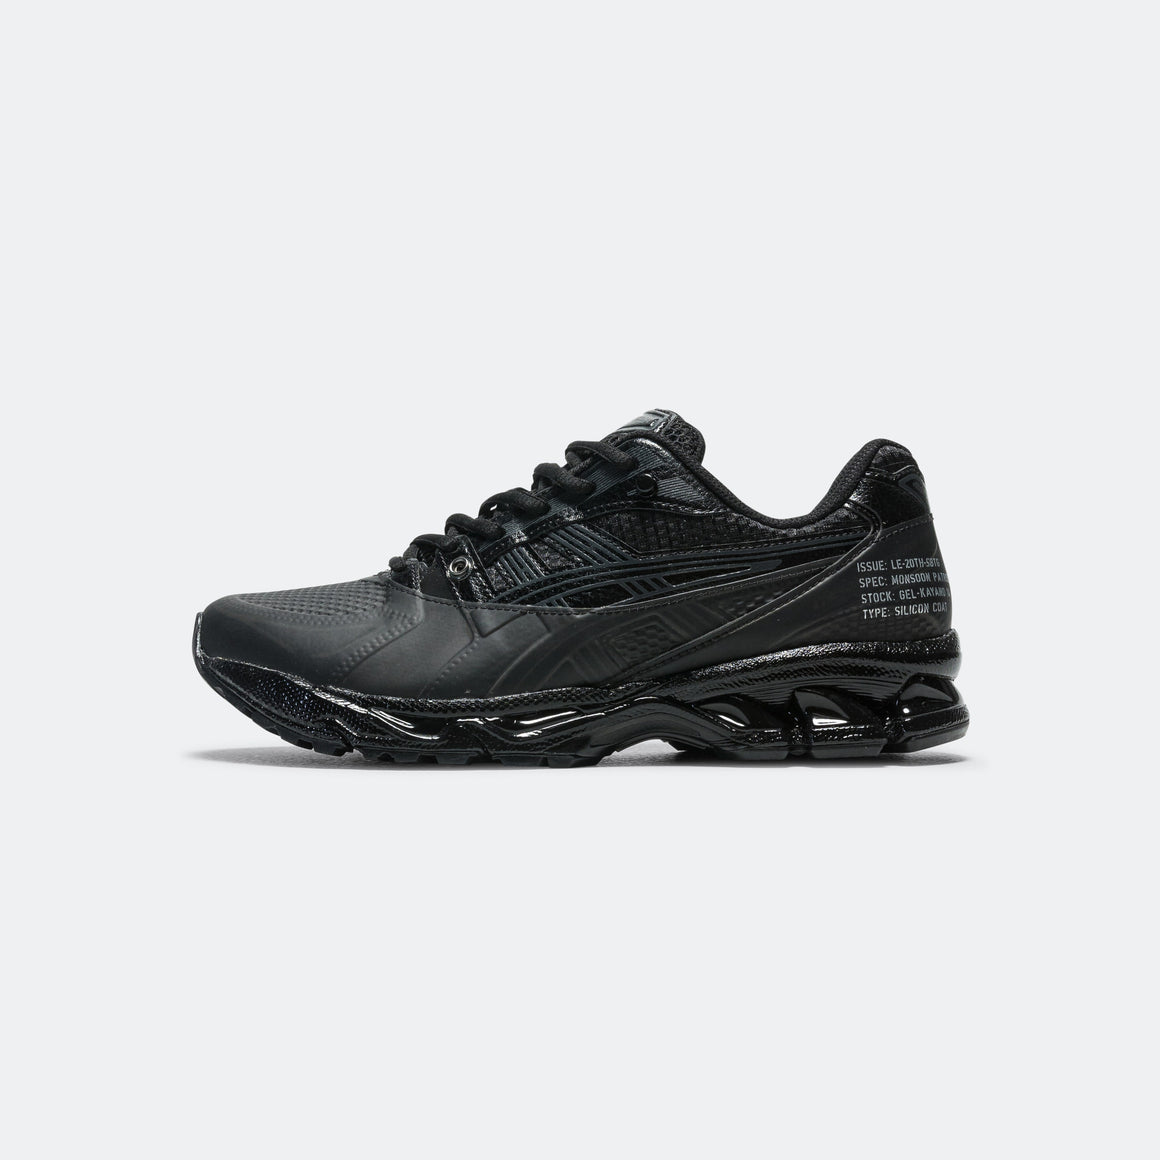 Asics - GEL-Kayano 14 x SBTG x Limited Edt - Black - UP THERE